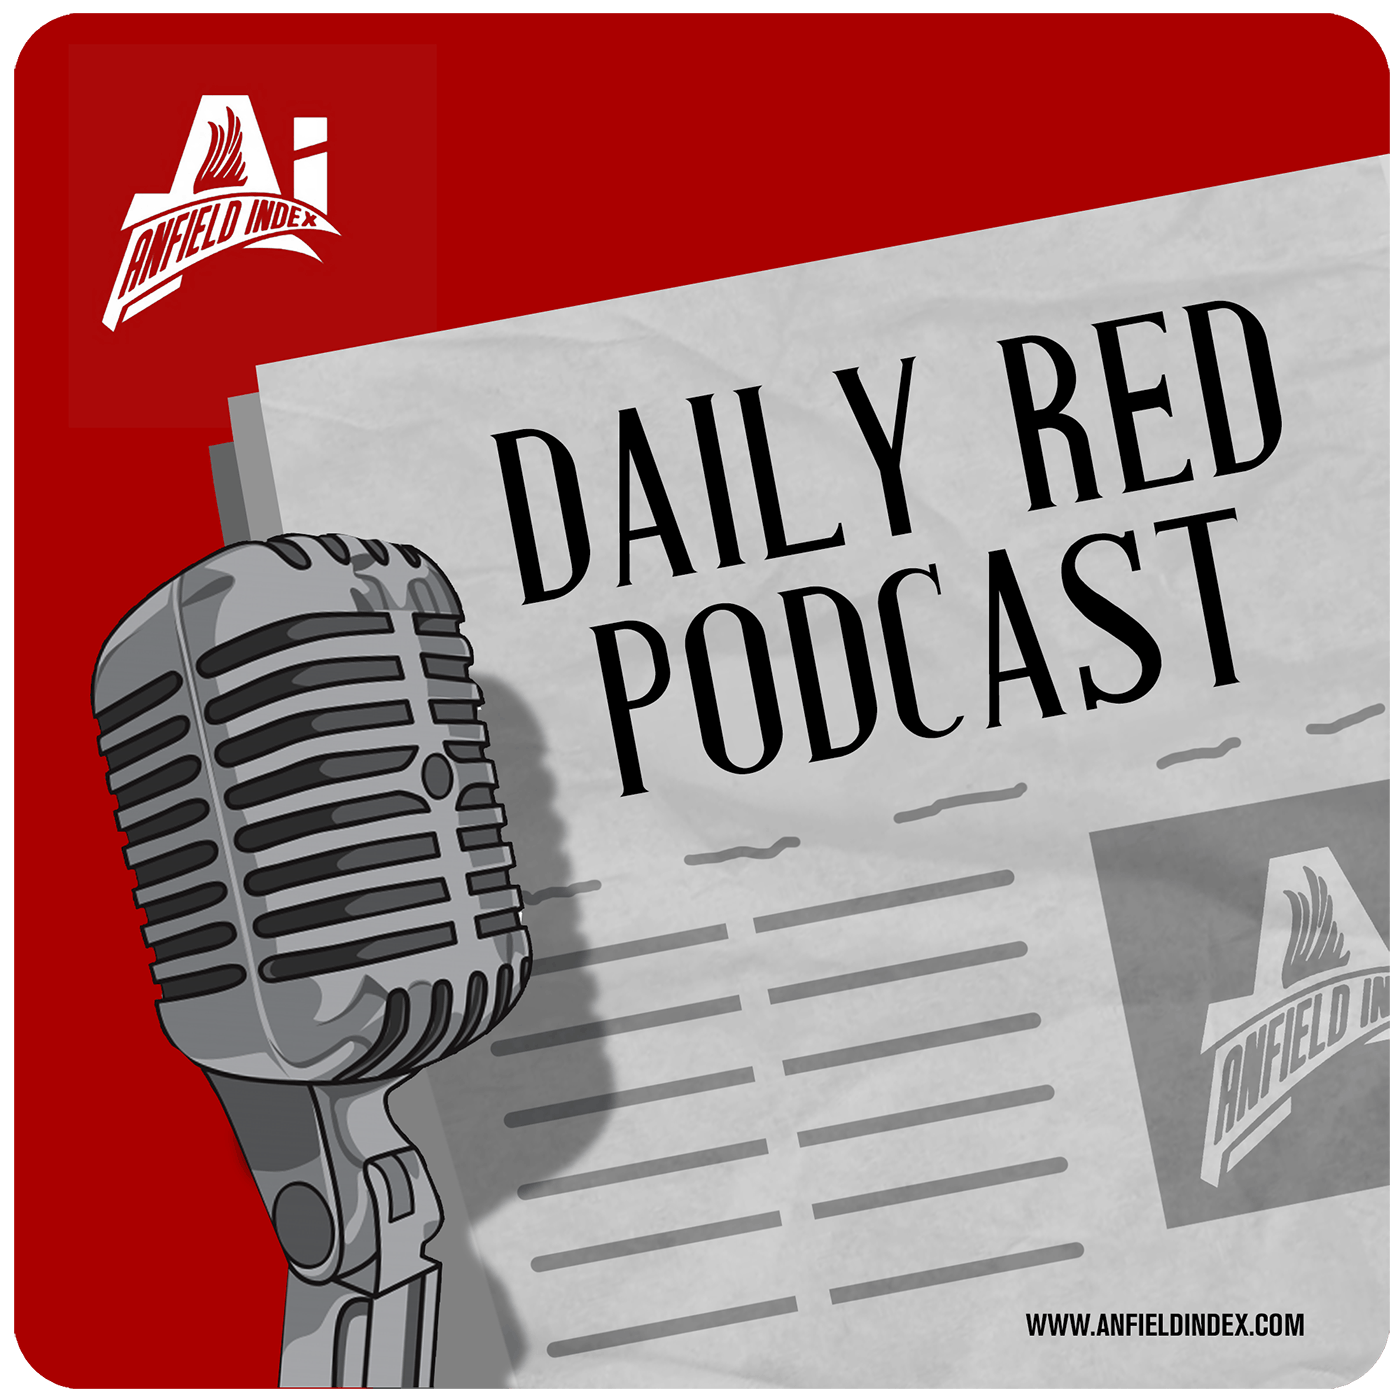 Ederson Bid & Olise Fit: Daily Red Podcast